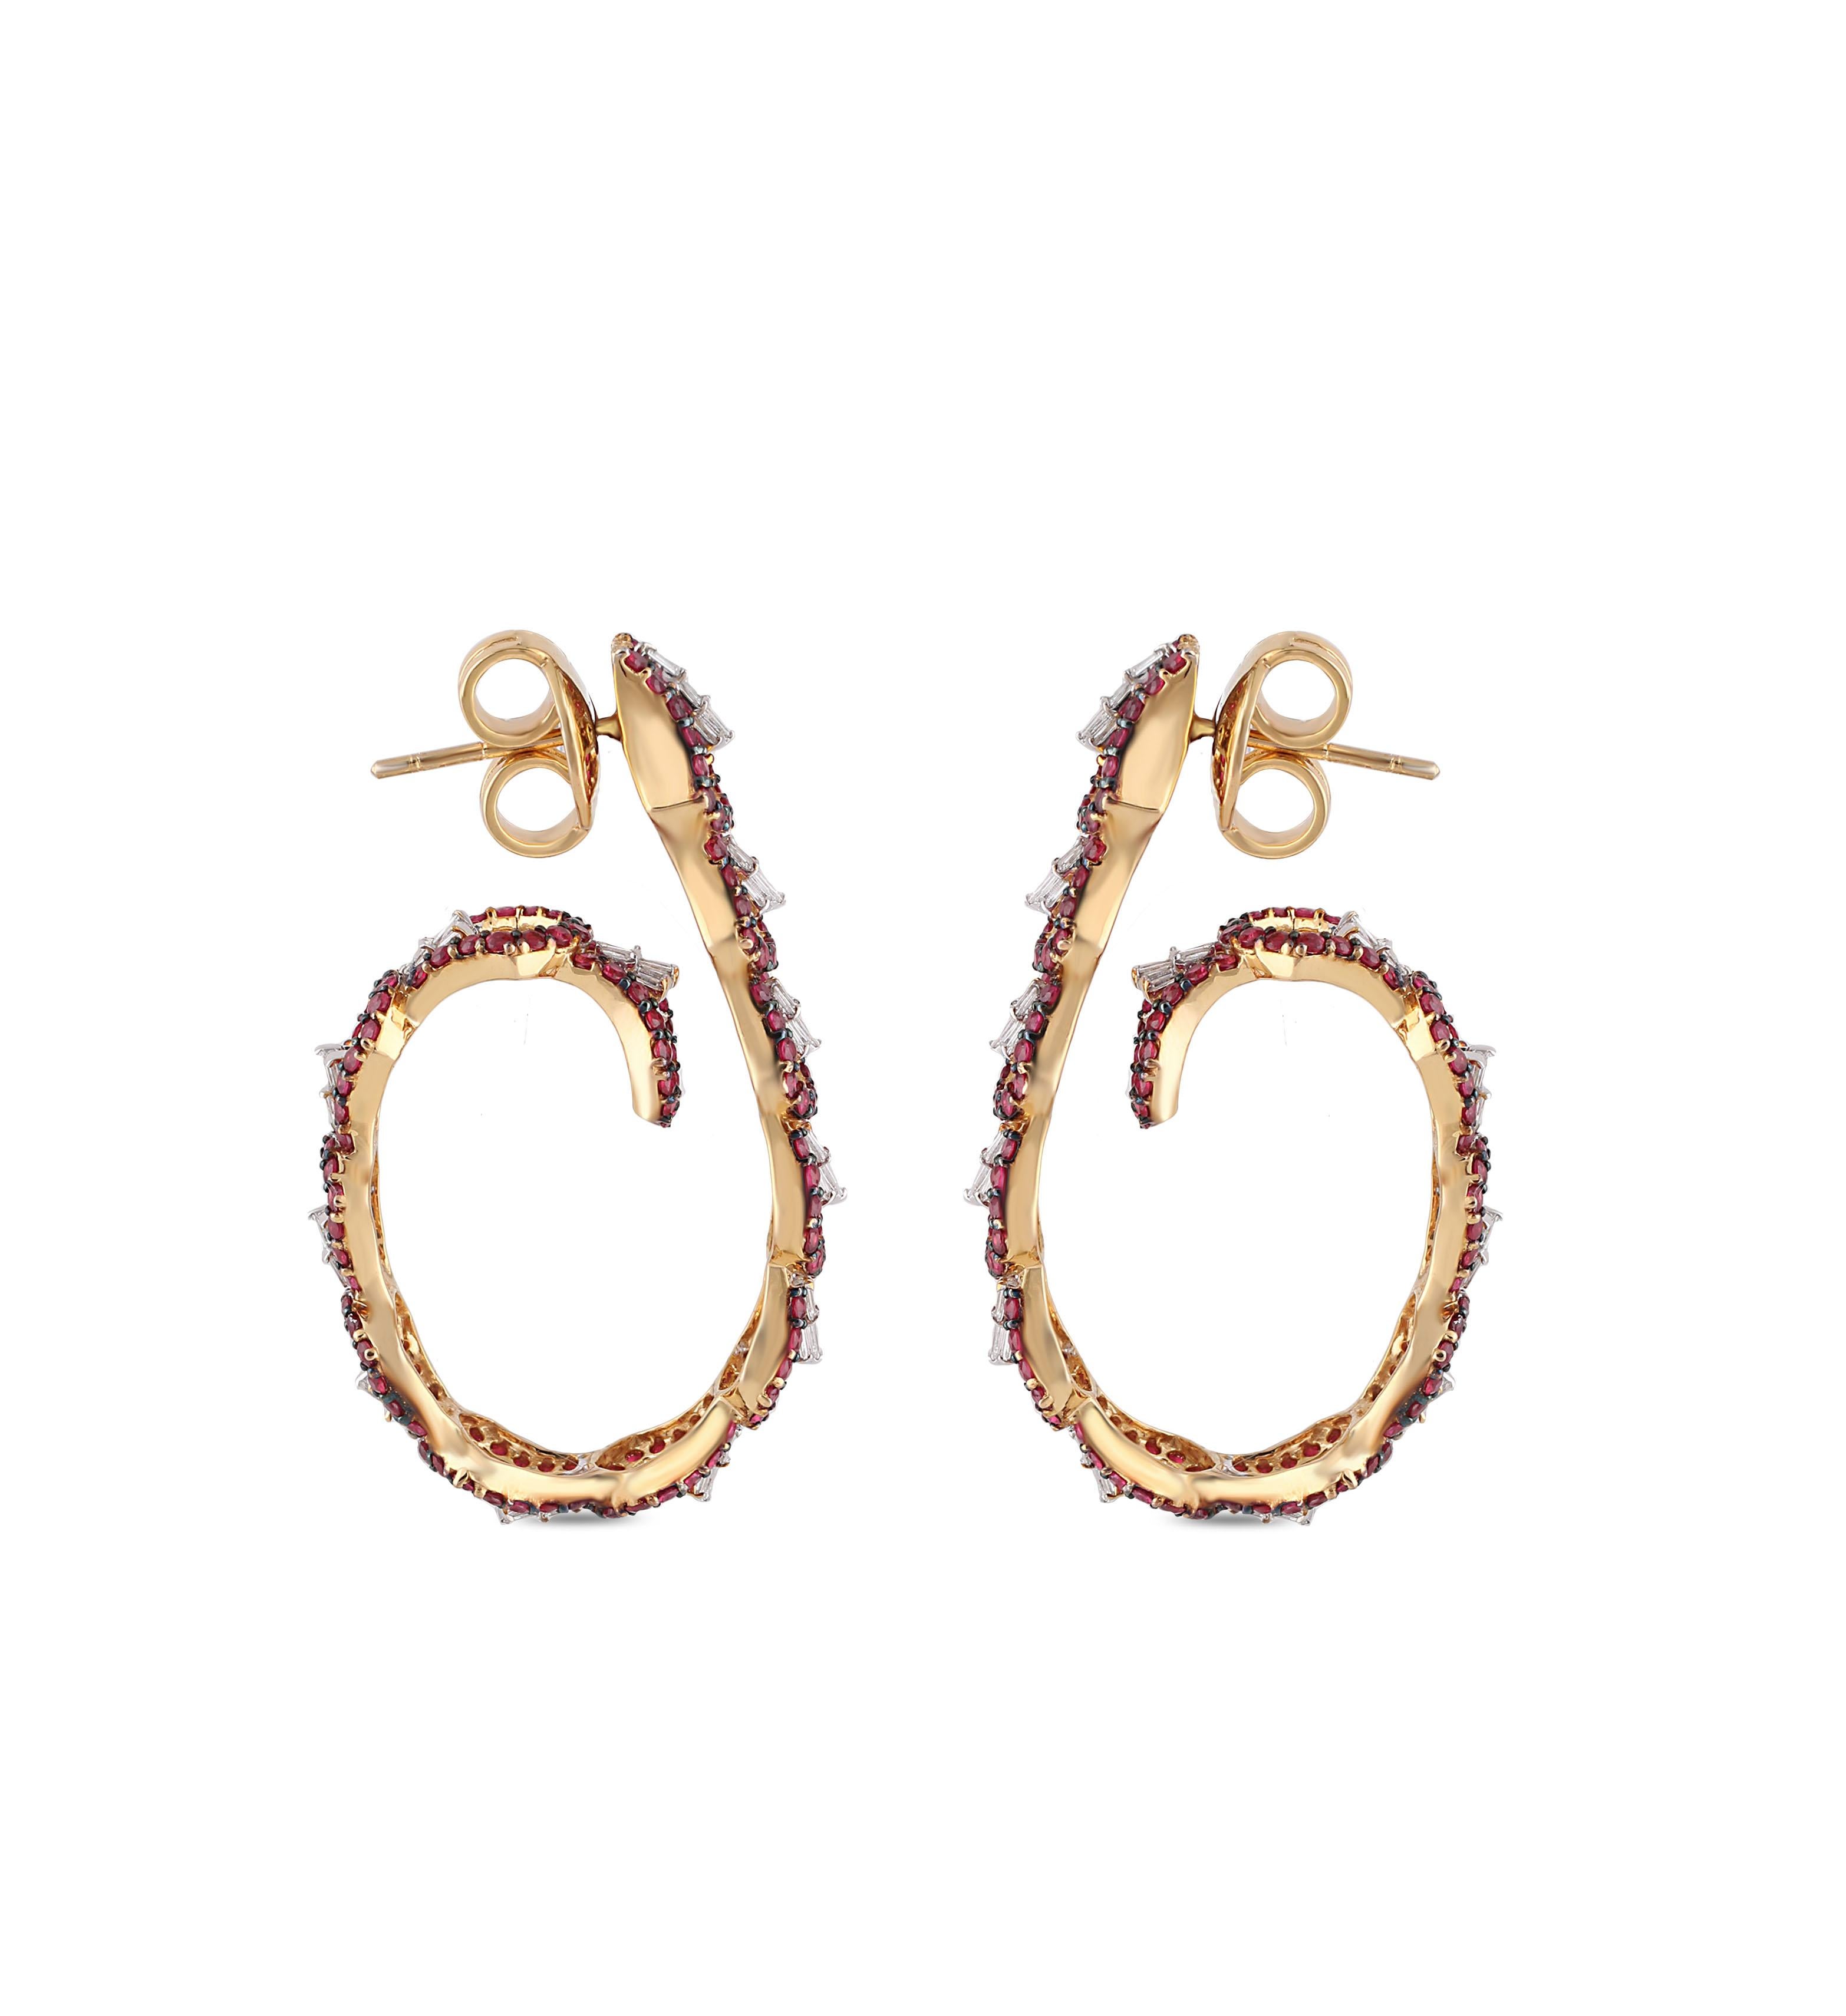 Studio Rêves Rubies with Tapered Baguette Diamond Hoop Earrings in 18 Karat Gold In New Condition For Sale In Mumbai, Maharashtra